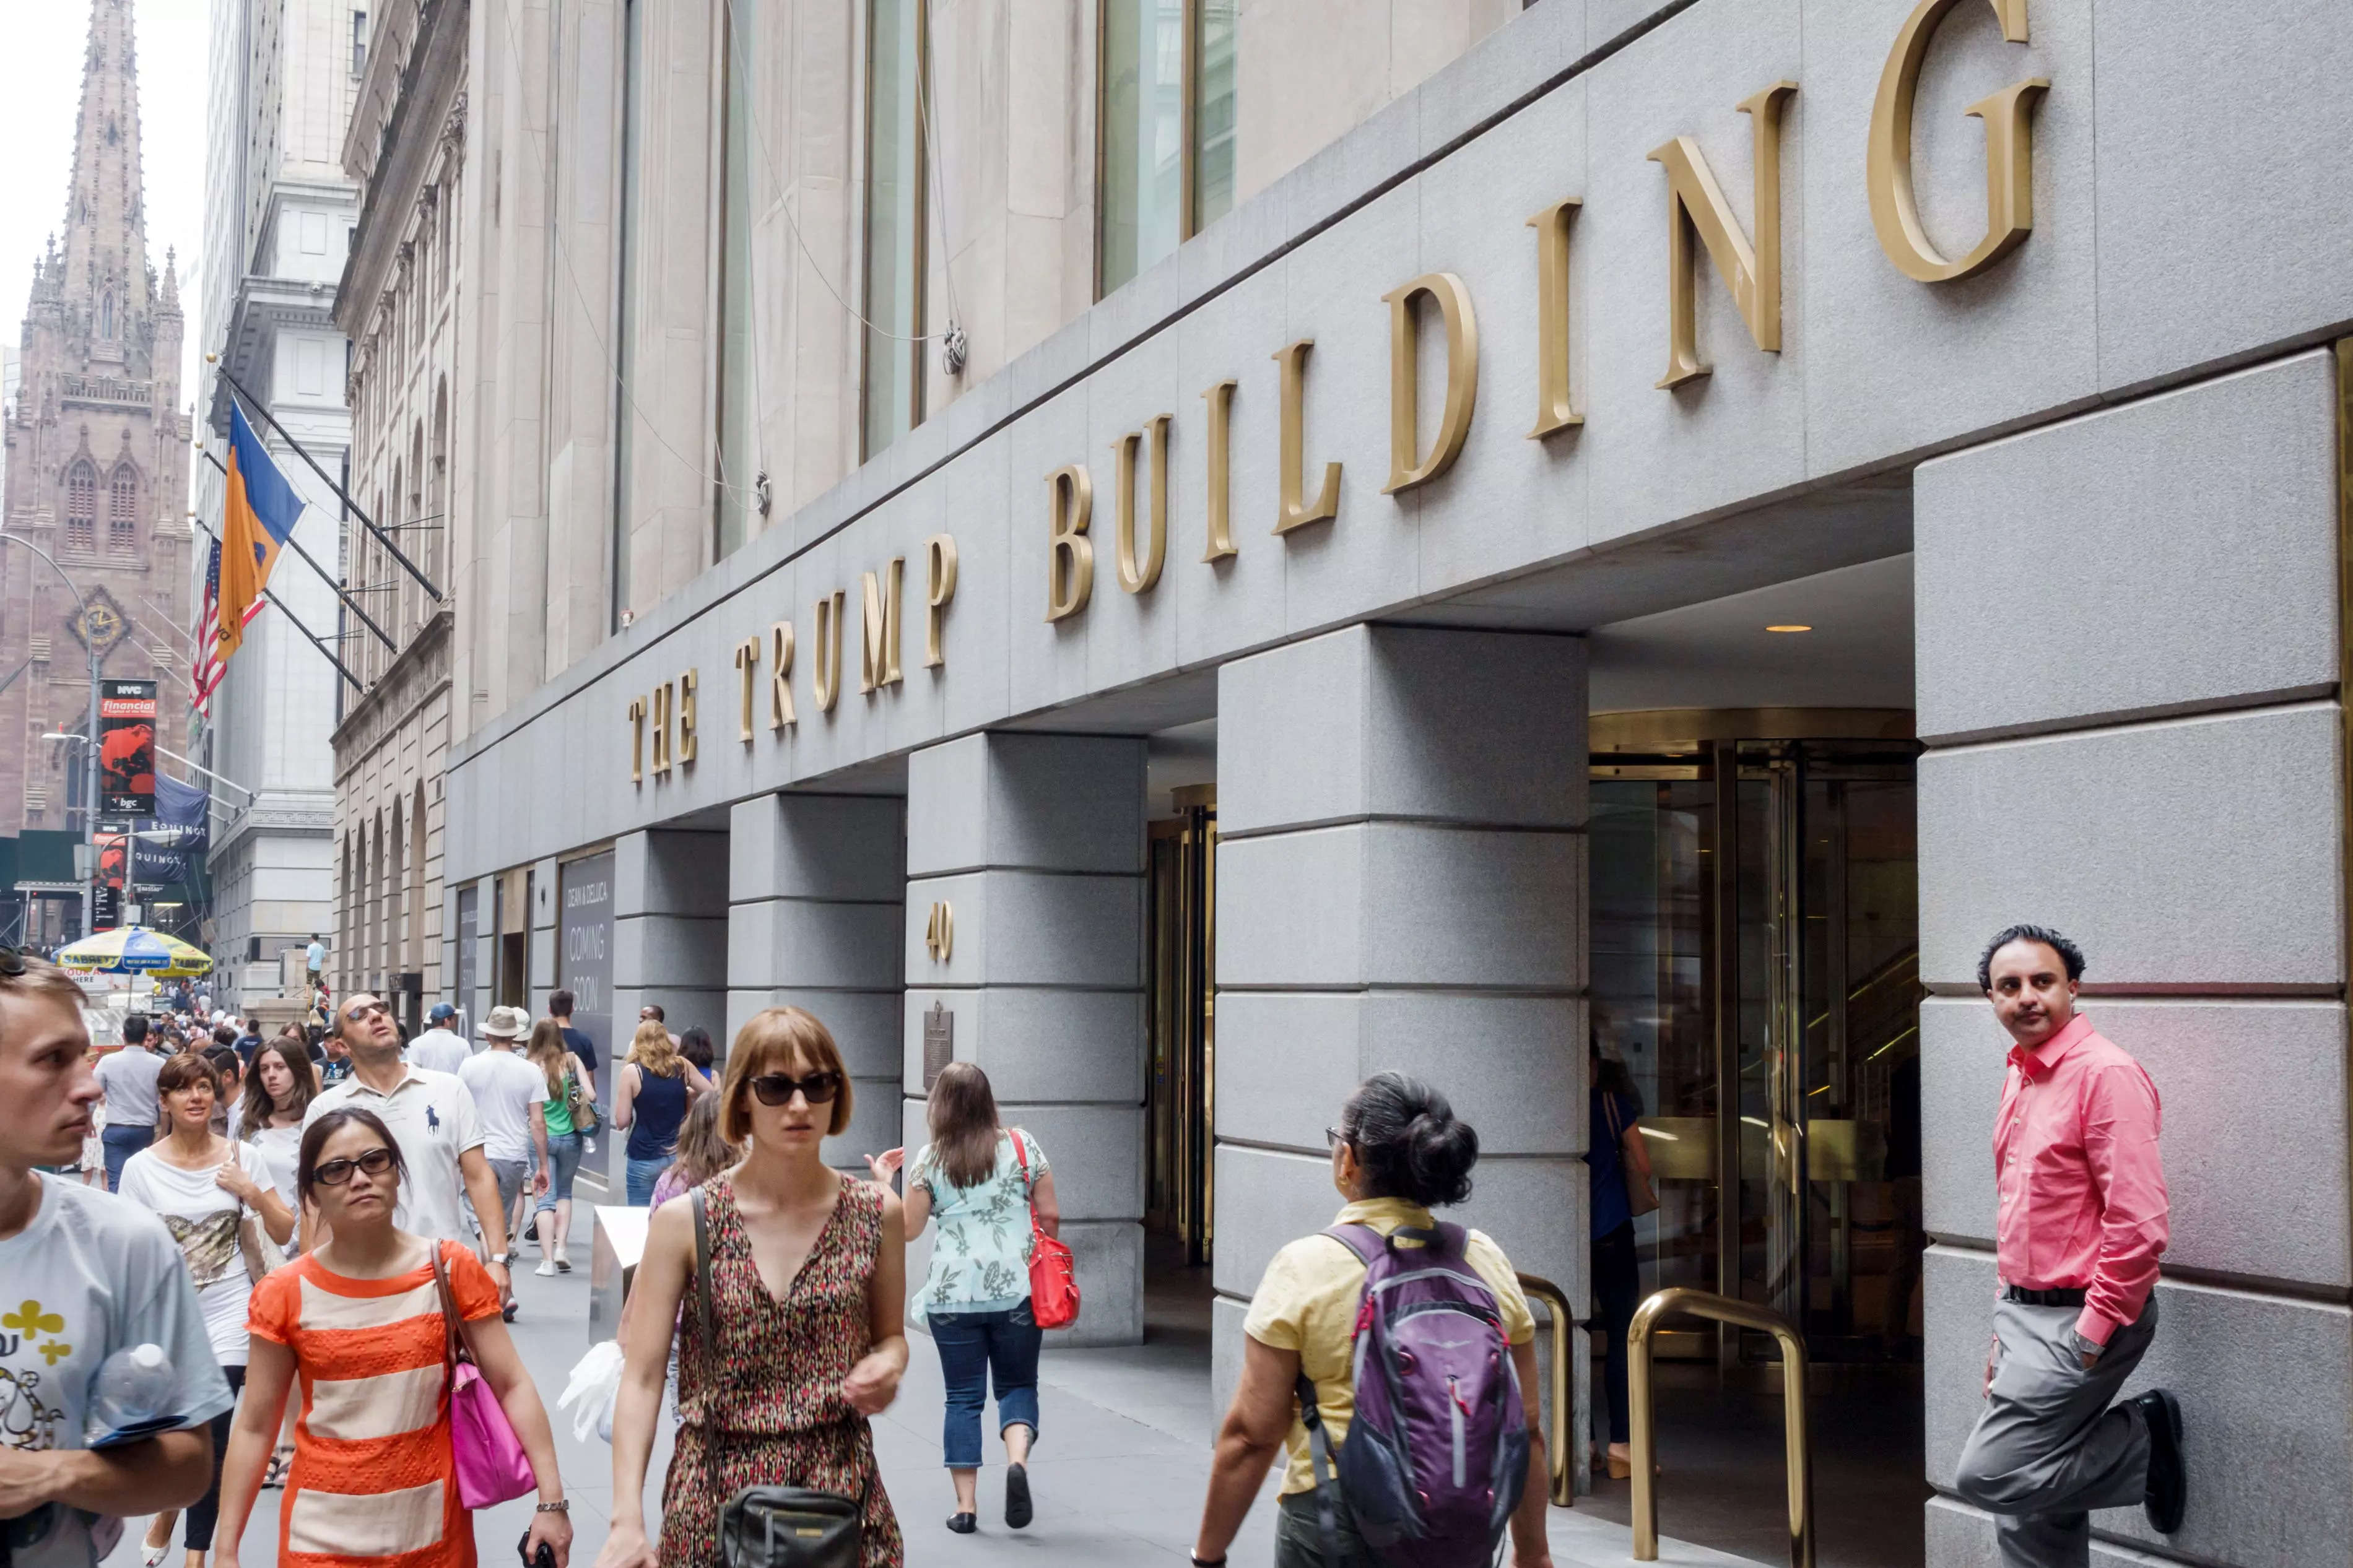 A crowd of New Yorkers walk past the gray facade of 40 Wall Street where "The Trump Building" is spelled out in gold letters